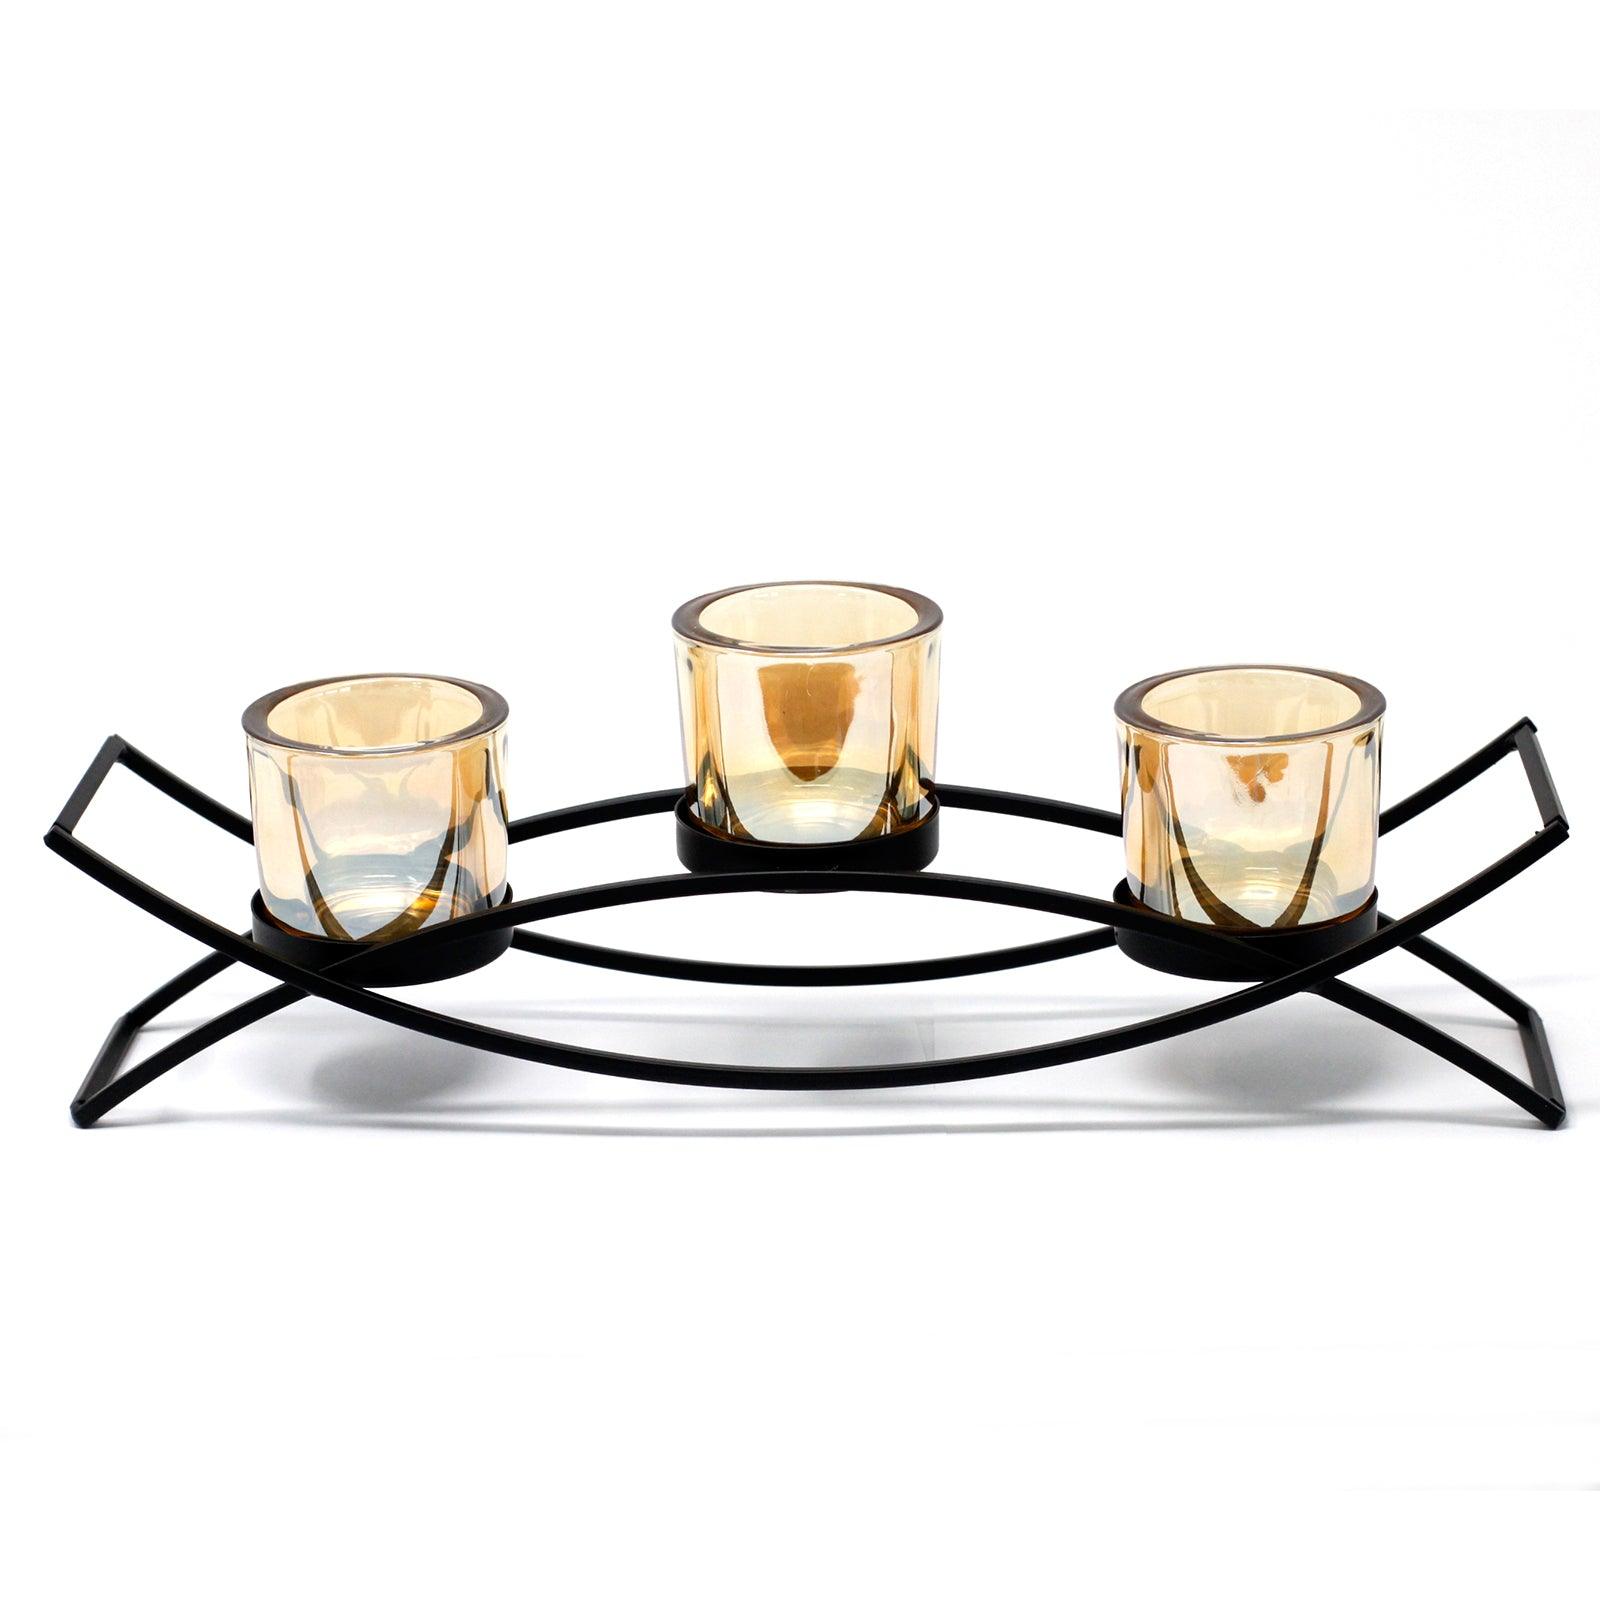 Centrepiece Iron Votive Candle Holder - 3 Cup Silhouette - Charming Spaces